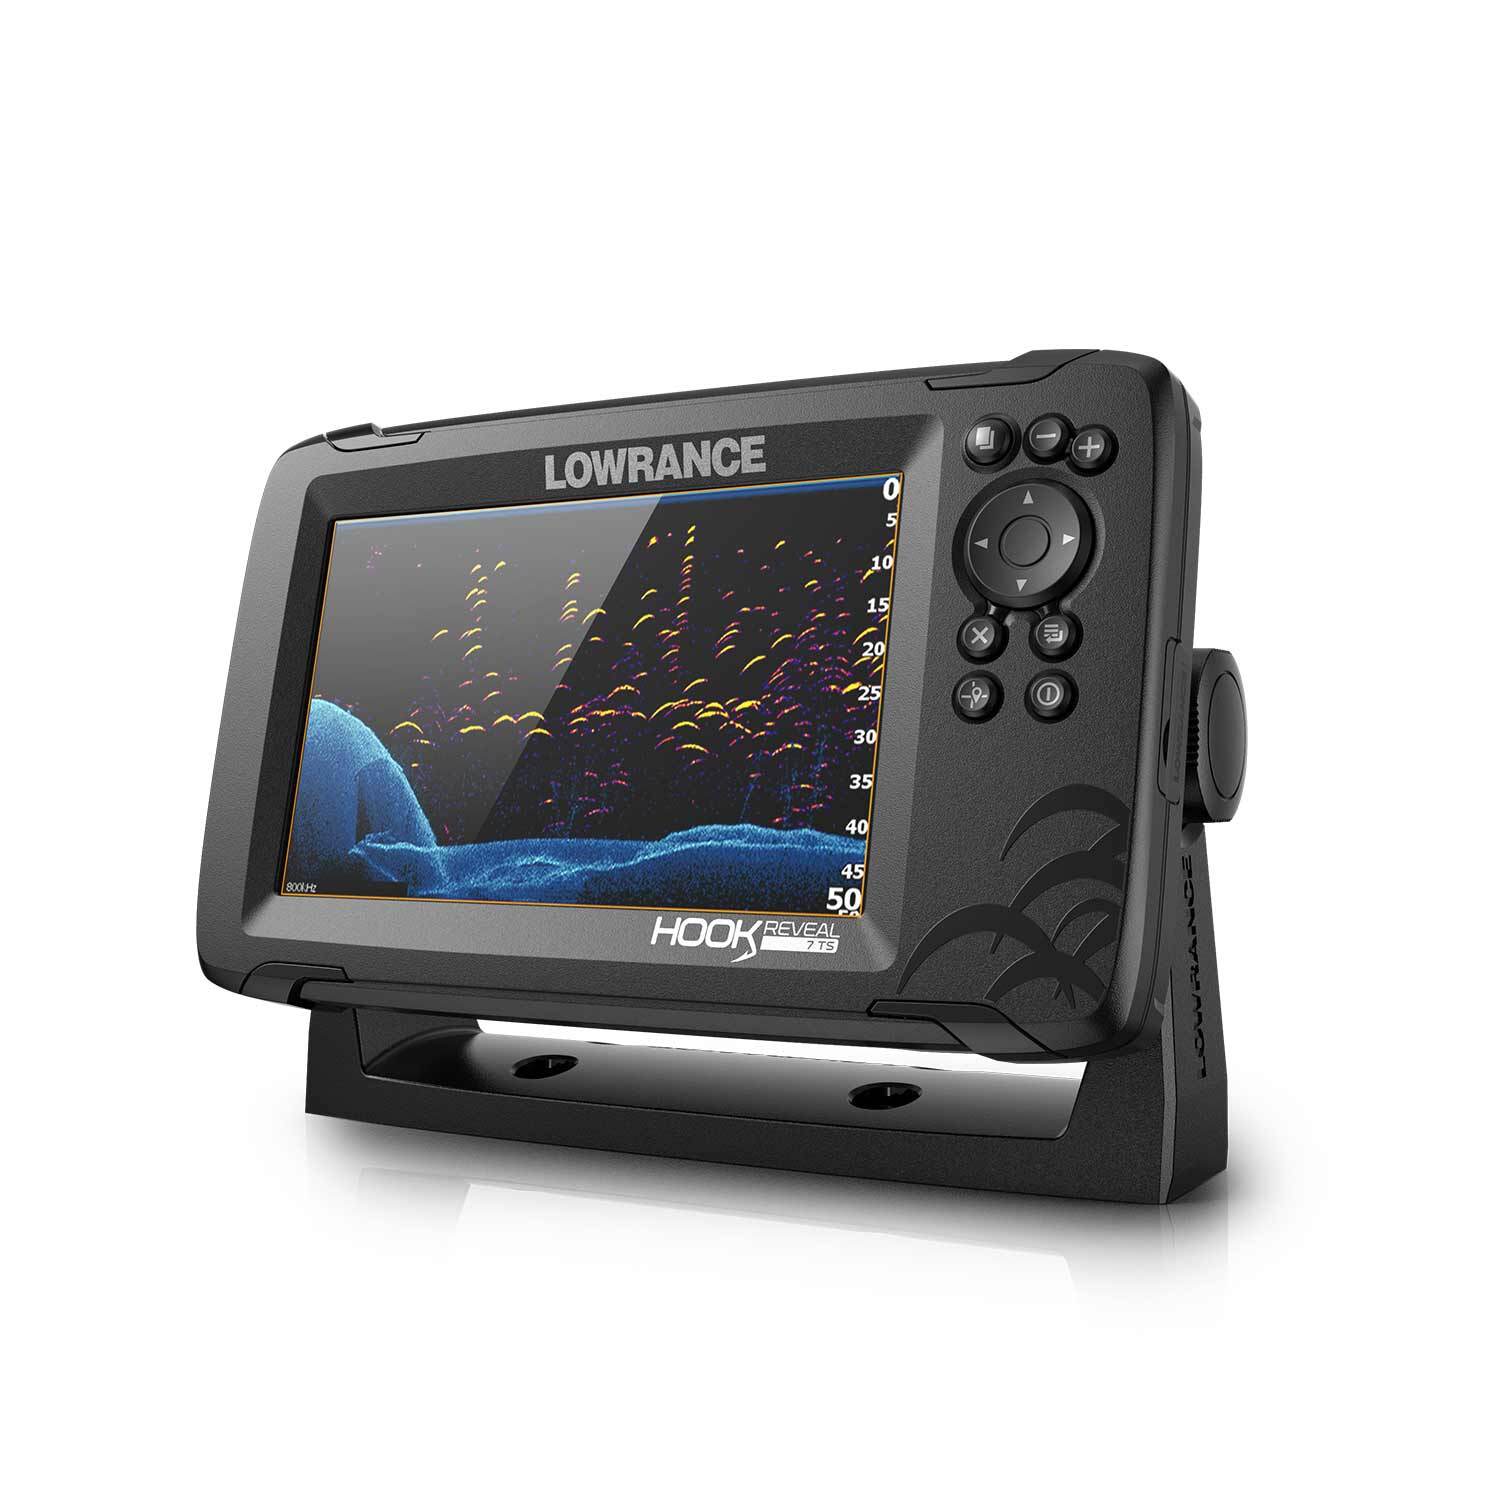 LOWRANCE HOOK Reveal 7 Fishfinder/Chartplotter Combo with TripleShot  Transducer and C-MAP Contour Plus Charts